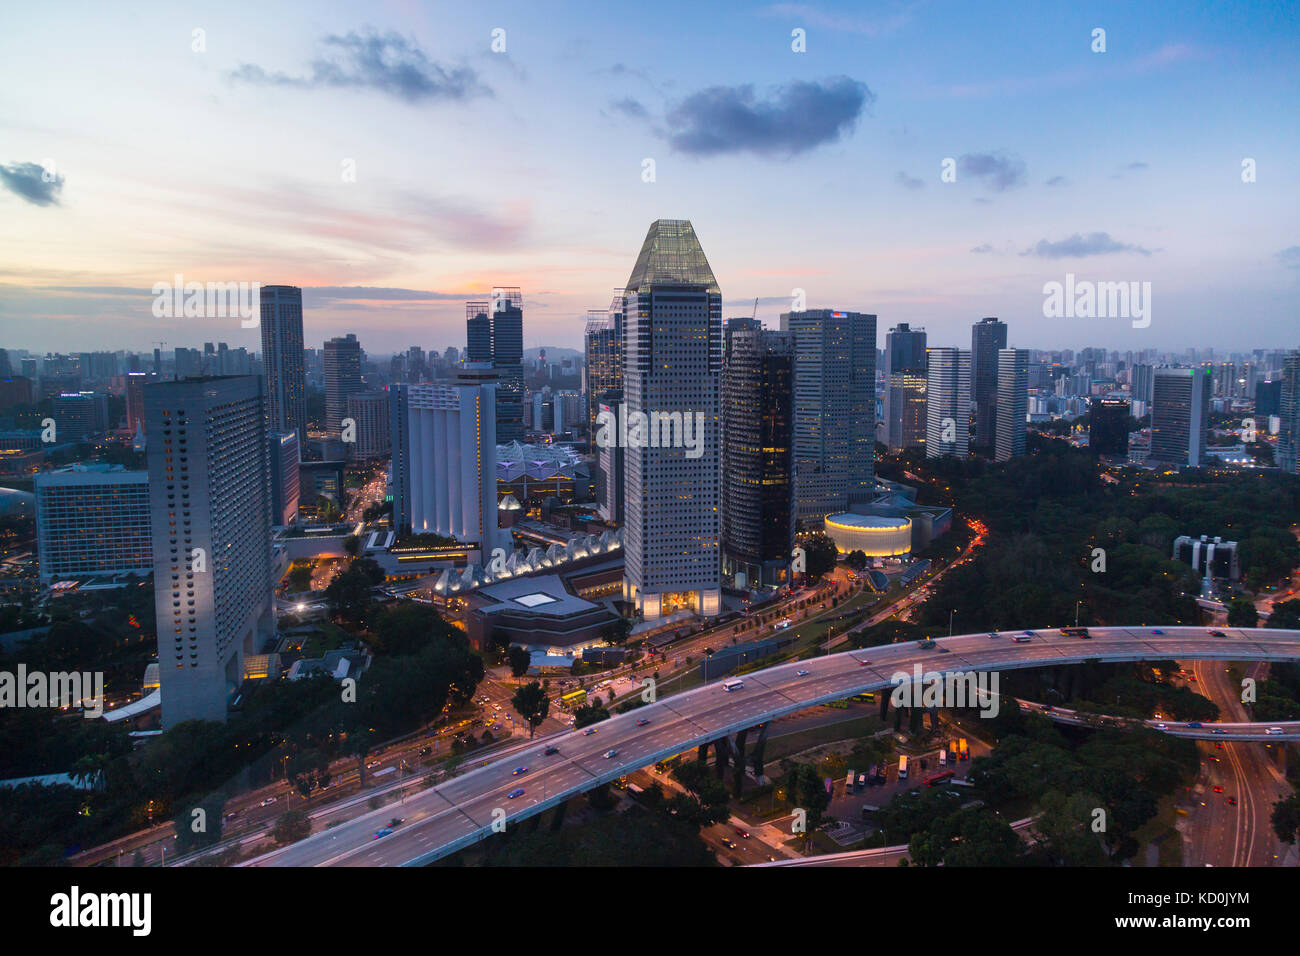 Elevated cityscape with highway and skyscrapers at dusk, Singapore, South East Asia Stock Photo